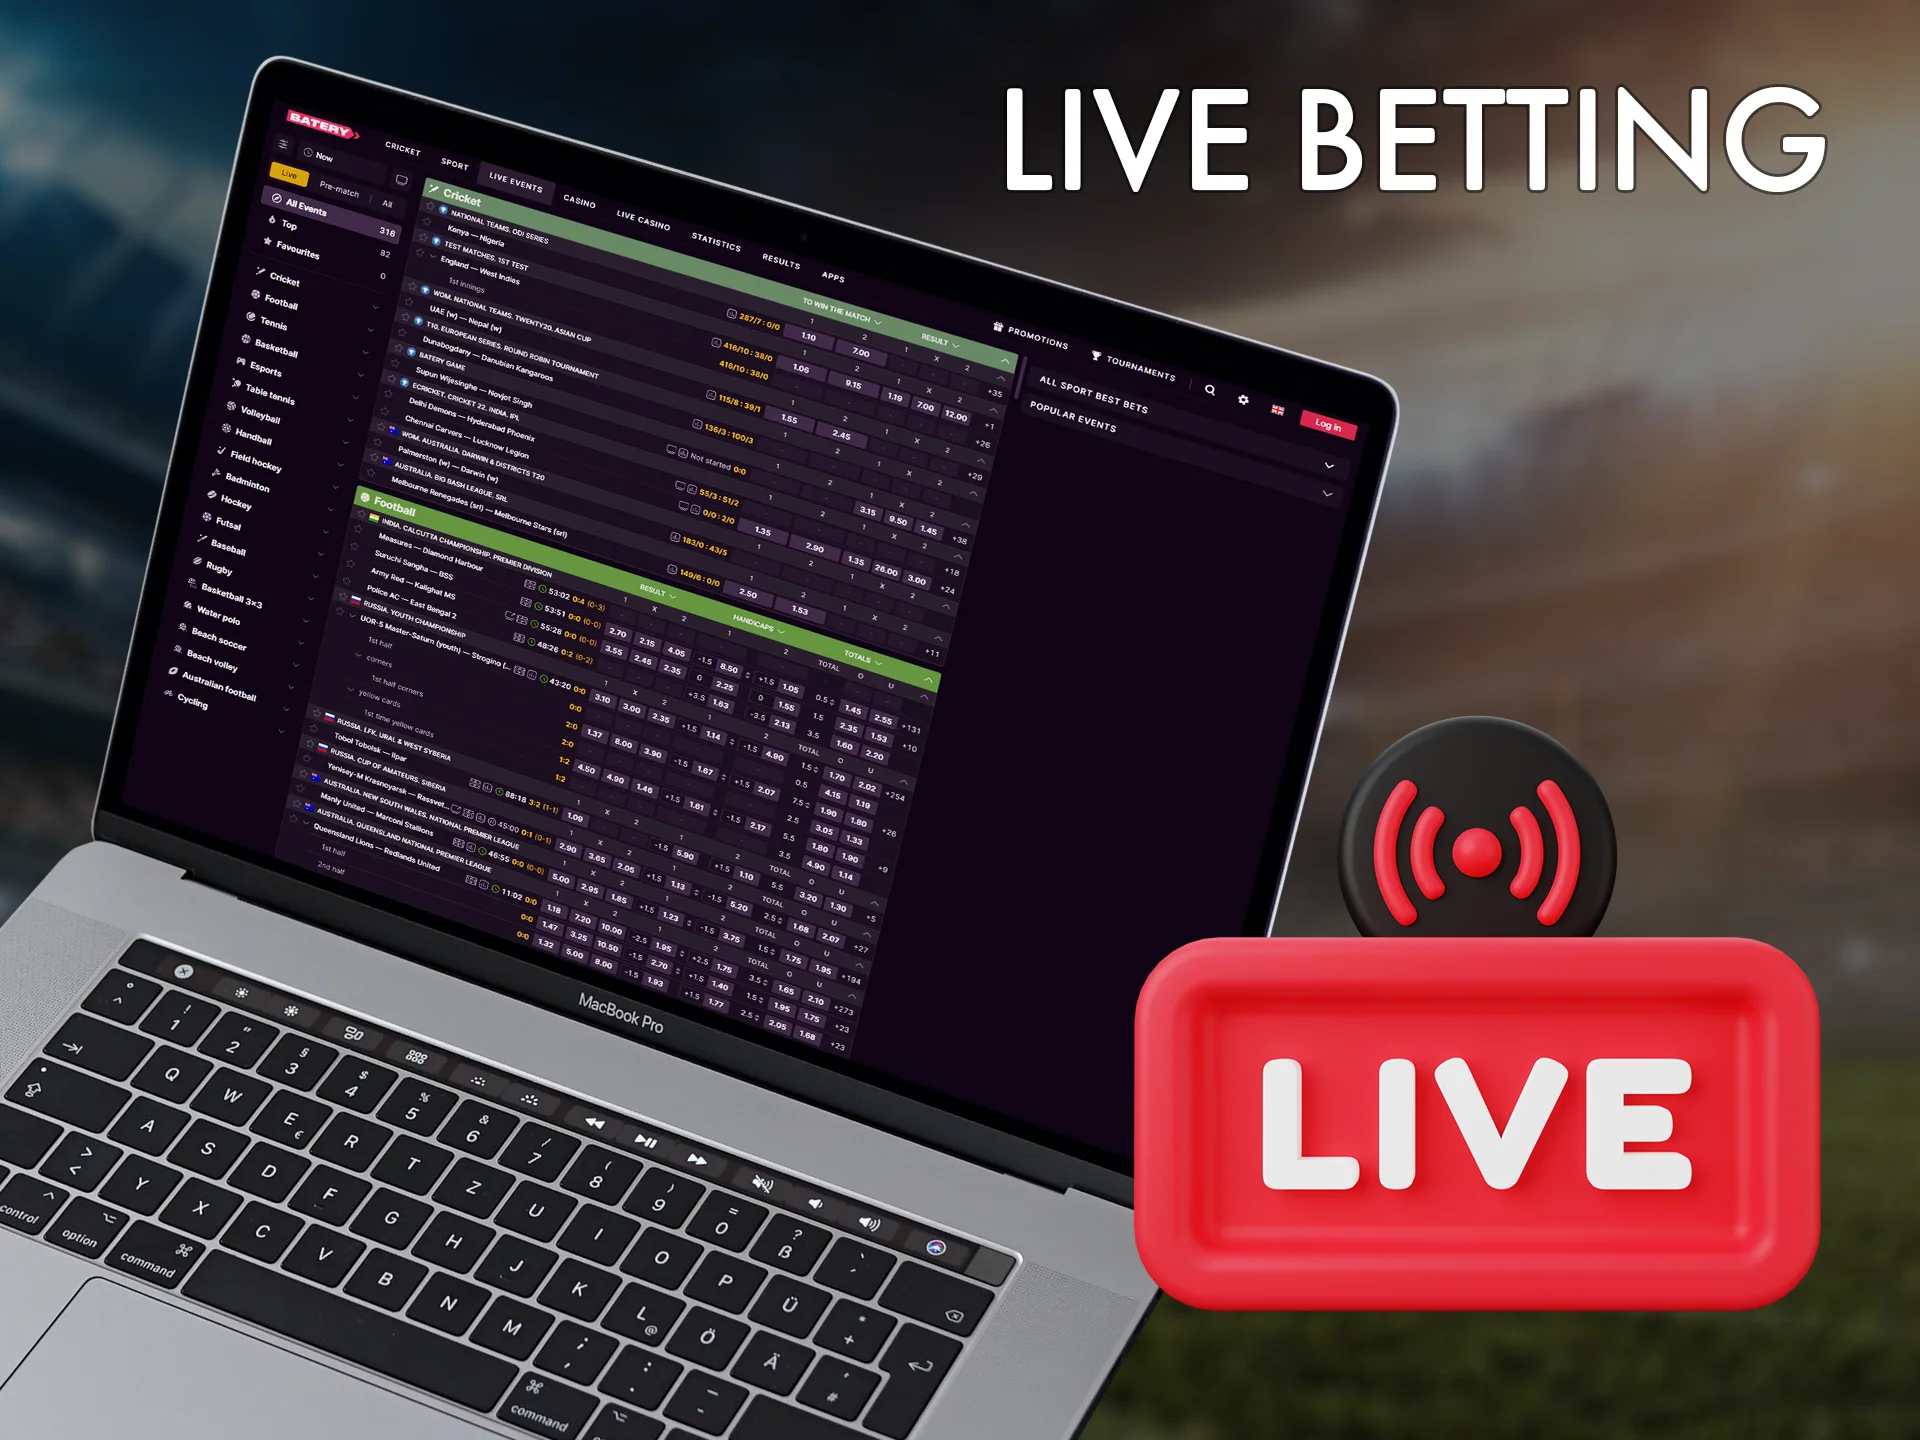 Choose your bookmaker and enjoy the match broadcasts.